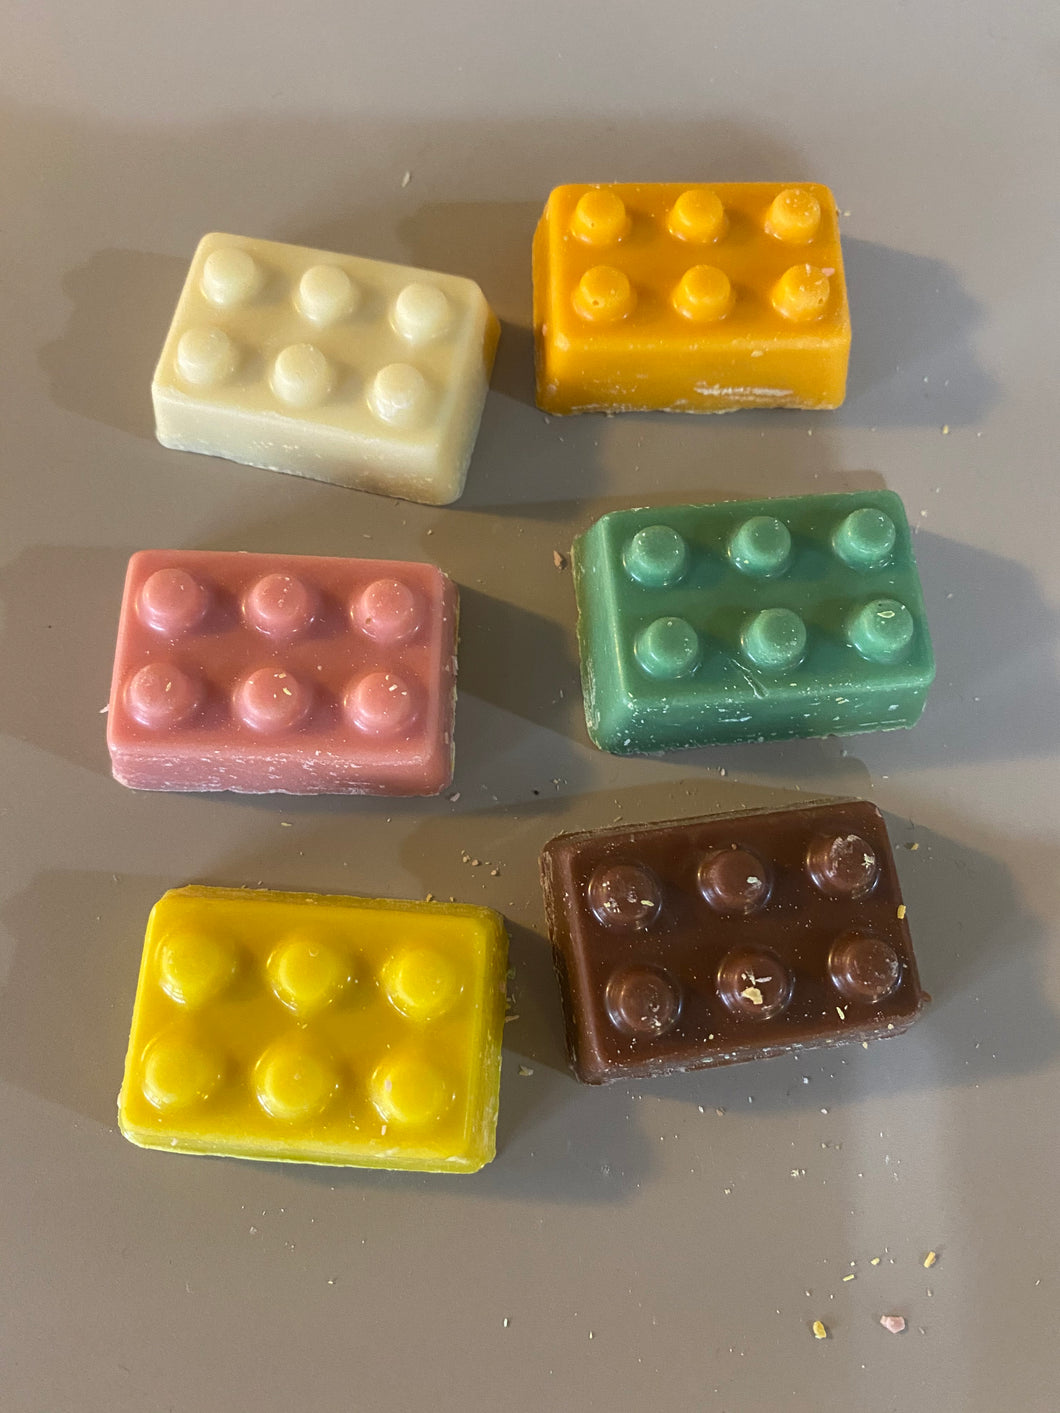 Packet of milk and white chocolate lego pieces (6in a pack) (Christmas)